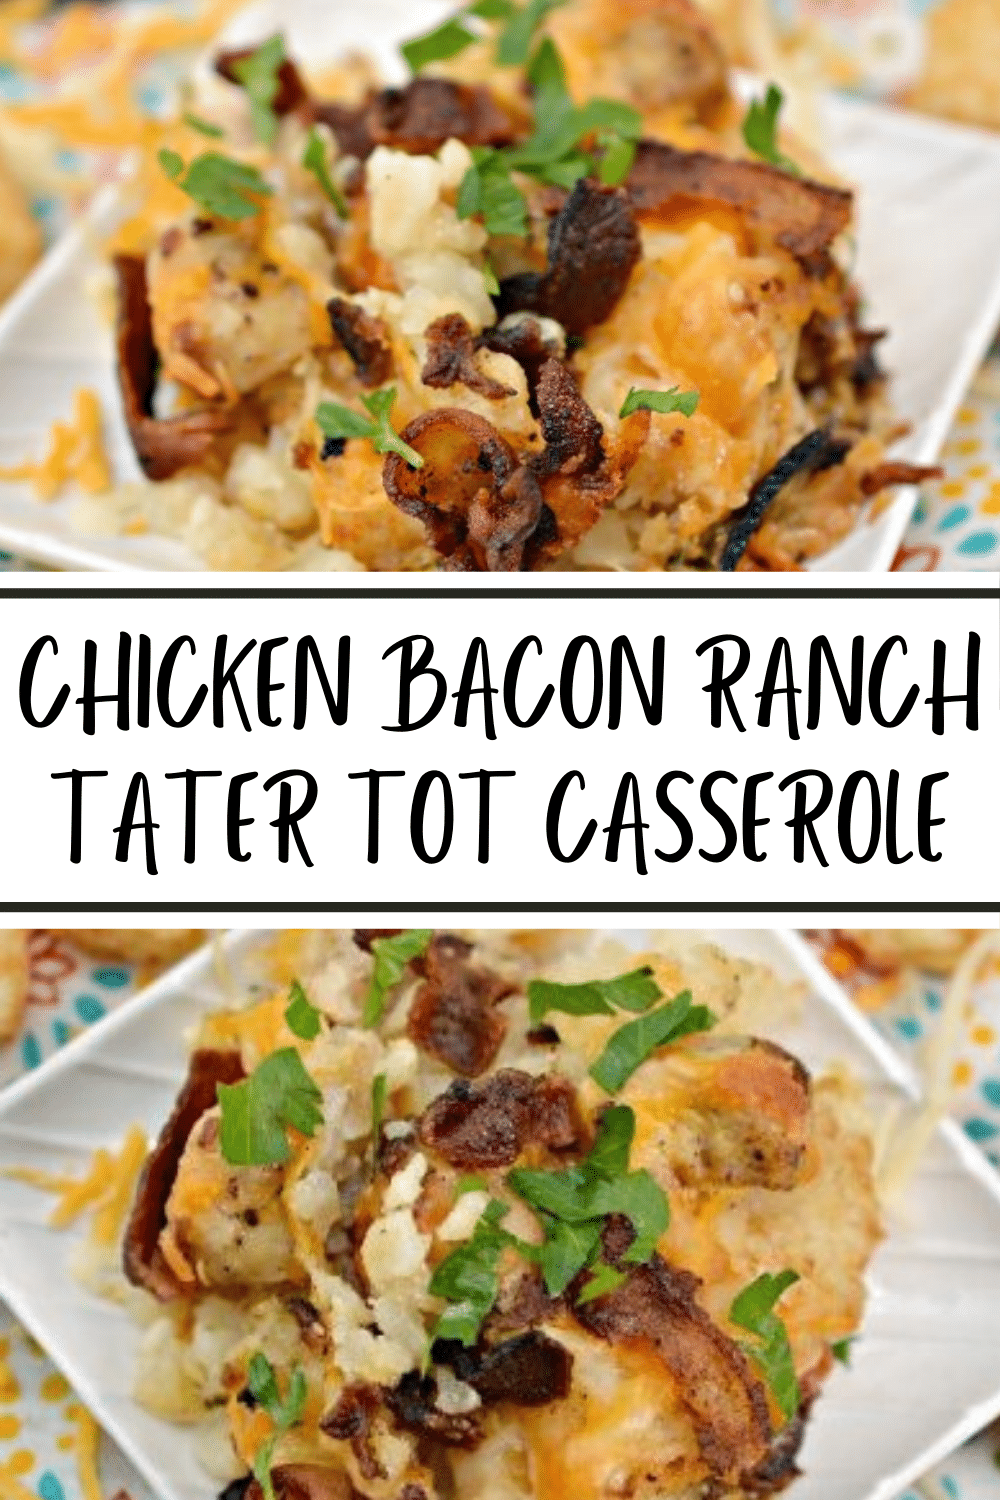 This Chicken Bacon Ranch Tater Tot Casserole is a casserole your family will love. This easy dinner recipe is full of flavor and is great comfort food. #casseroles #chicken #ranch via @wondermomwannab